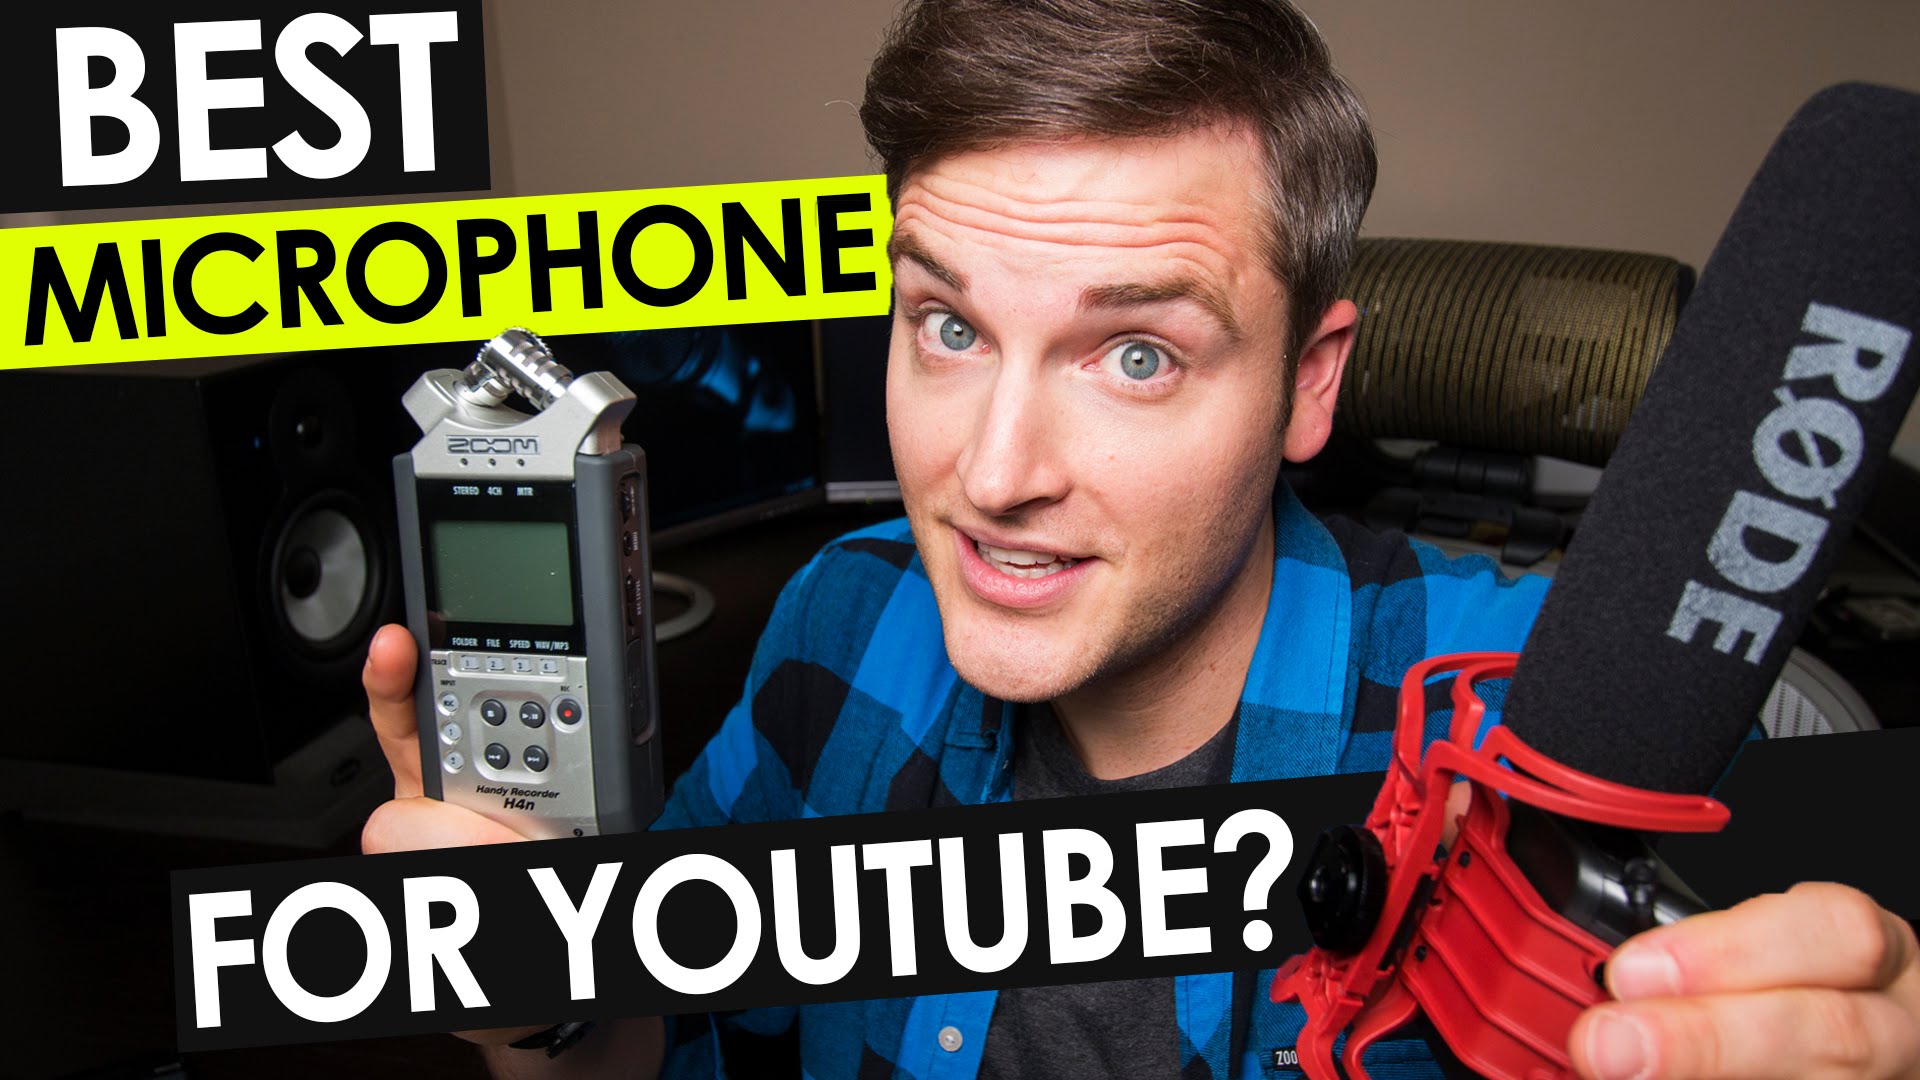 Best Microphone For YouTube Videos?